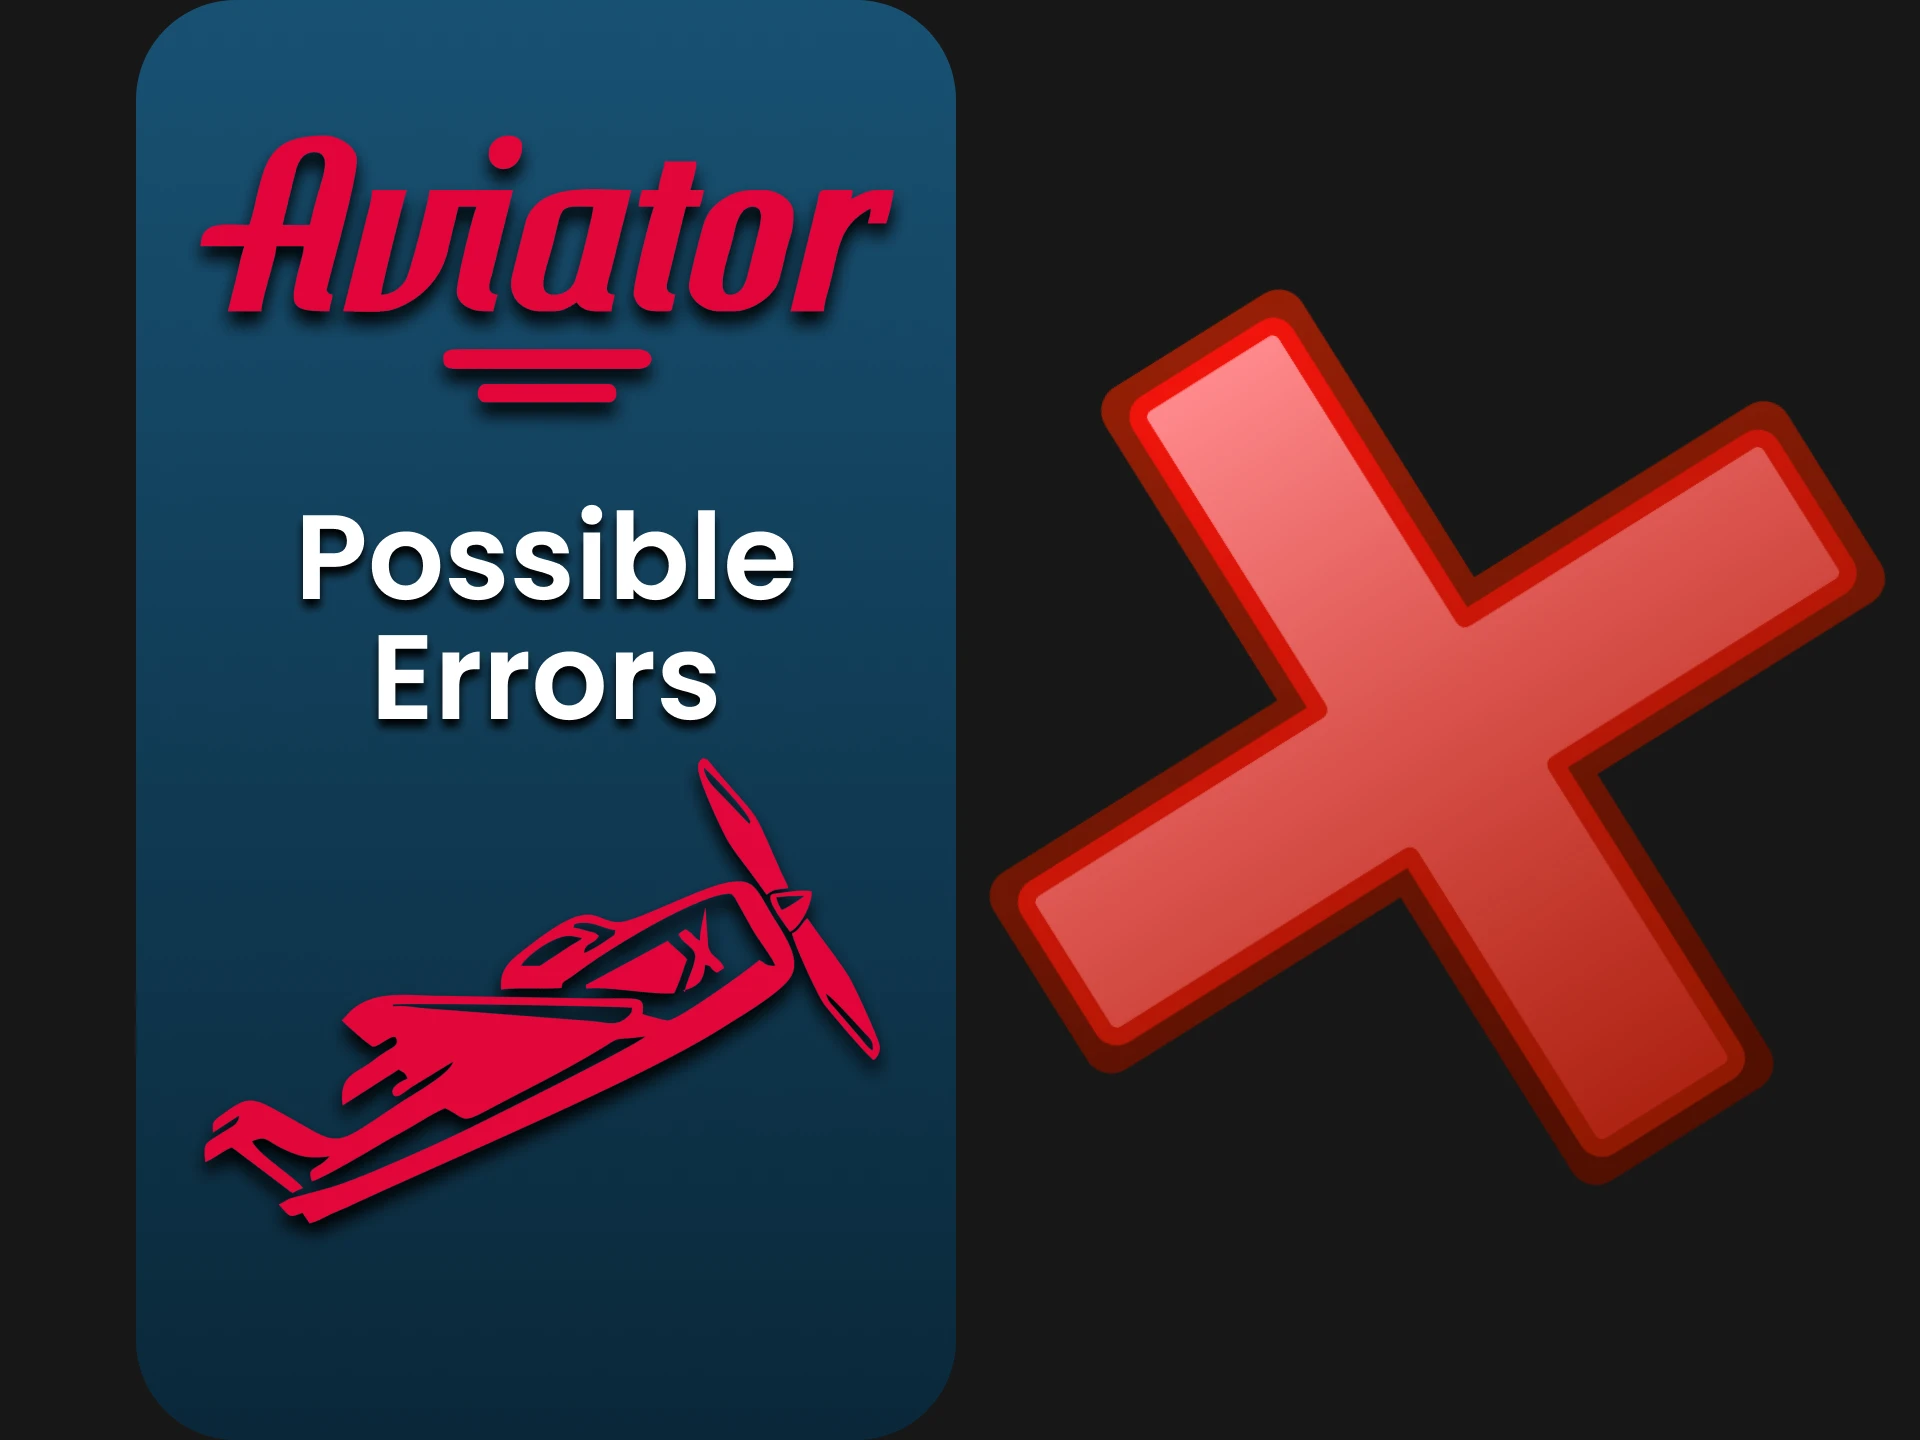 We will tell you about possible problems in the Aviator application.